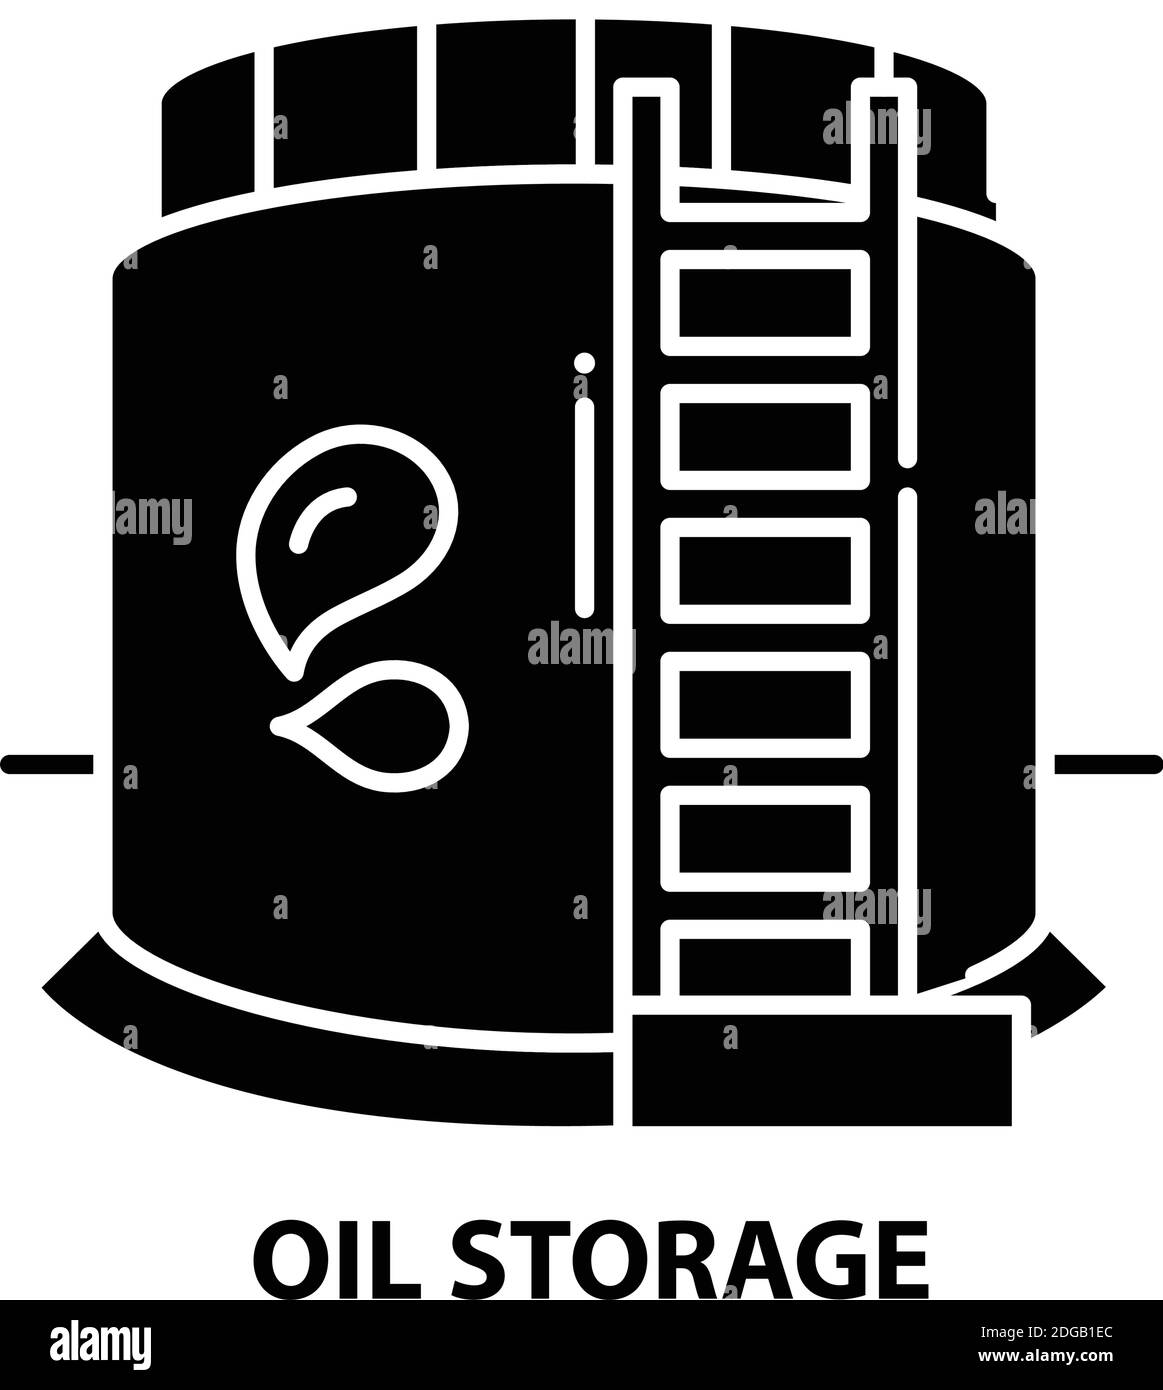 oil storage icon, black vector sign with editable strokes, concept illustration Stock Vector